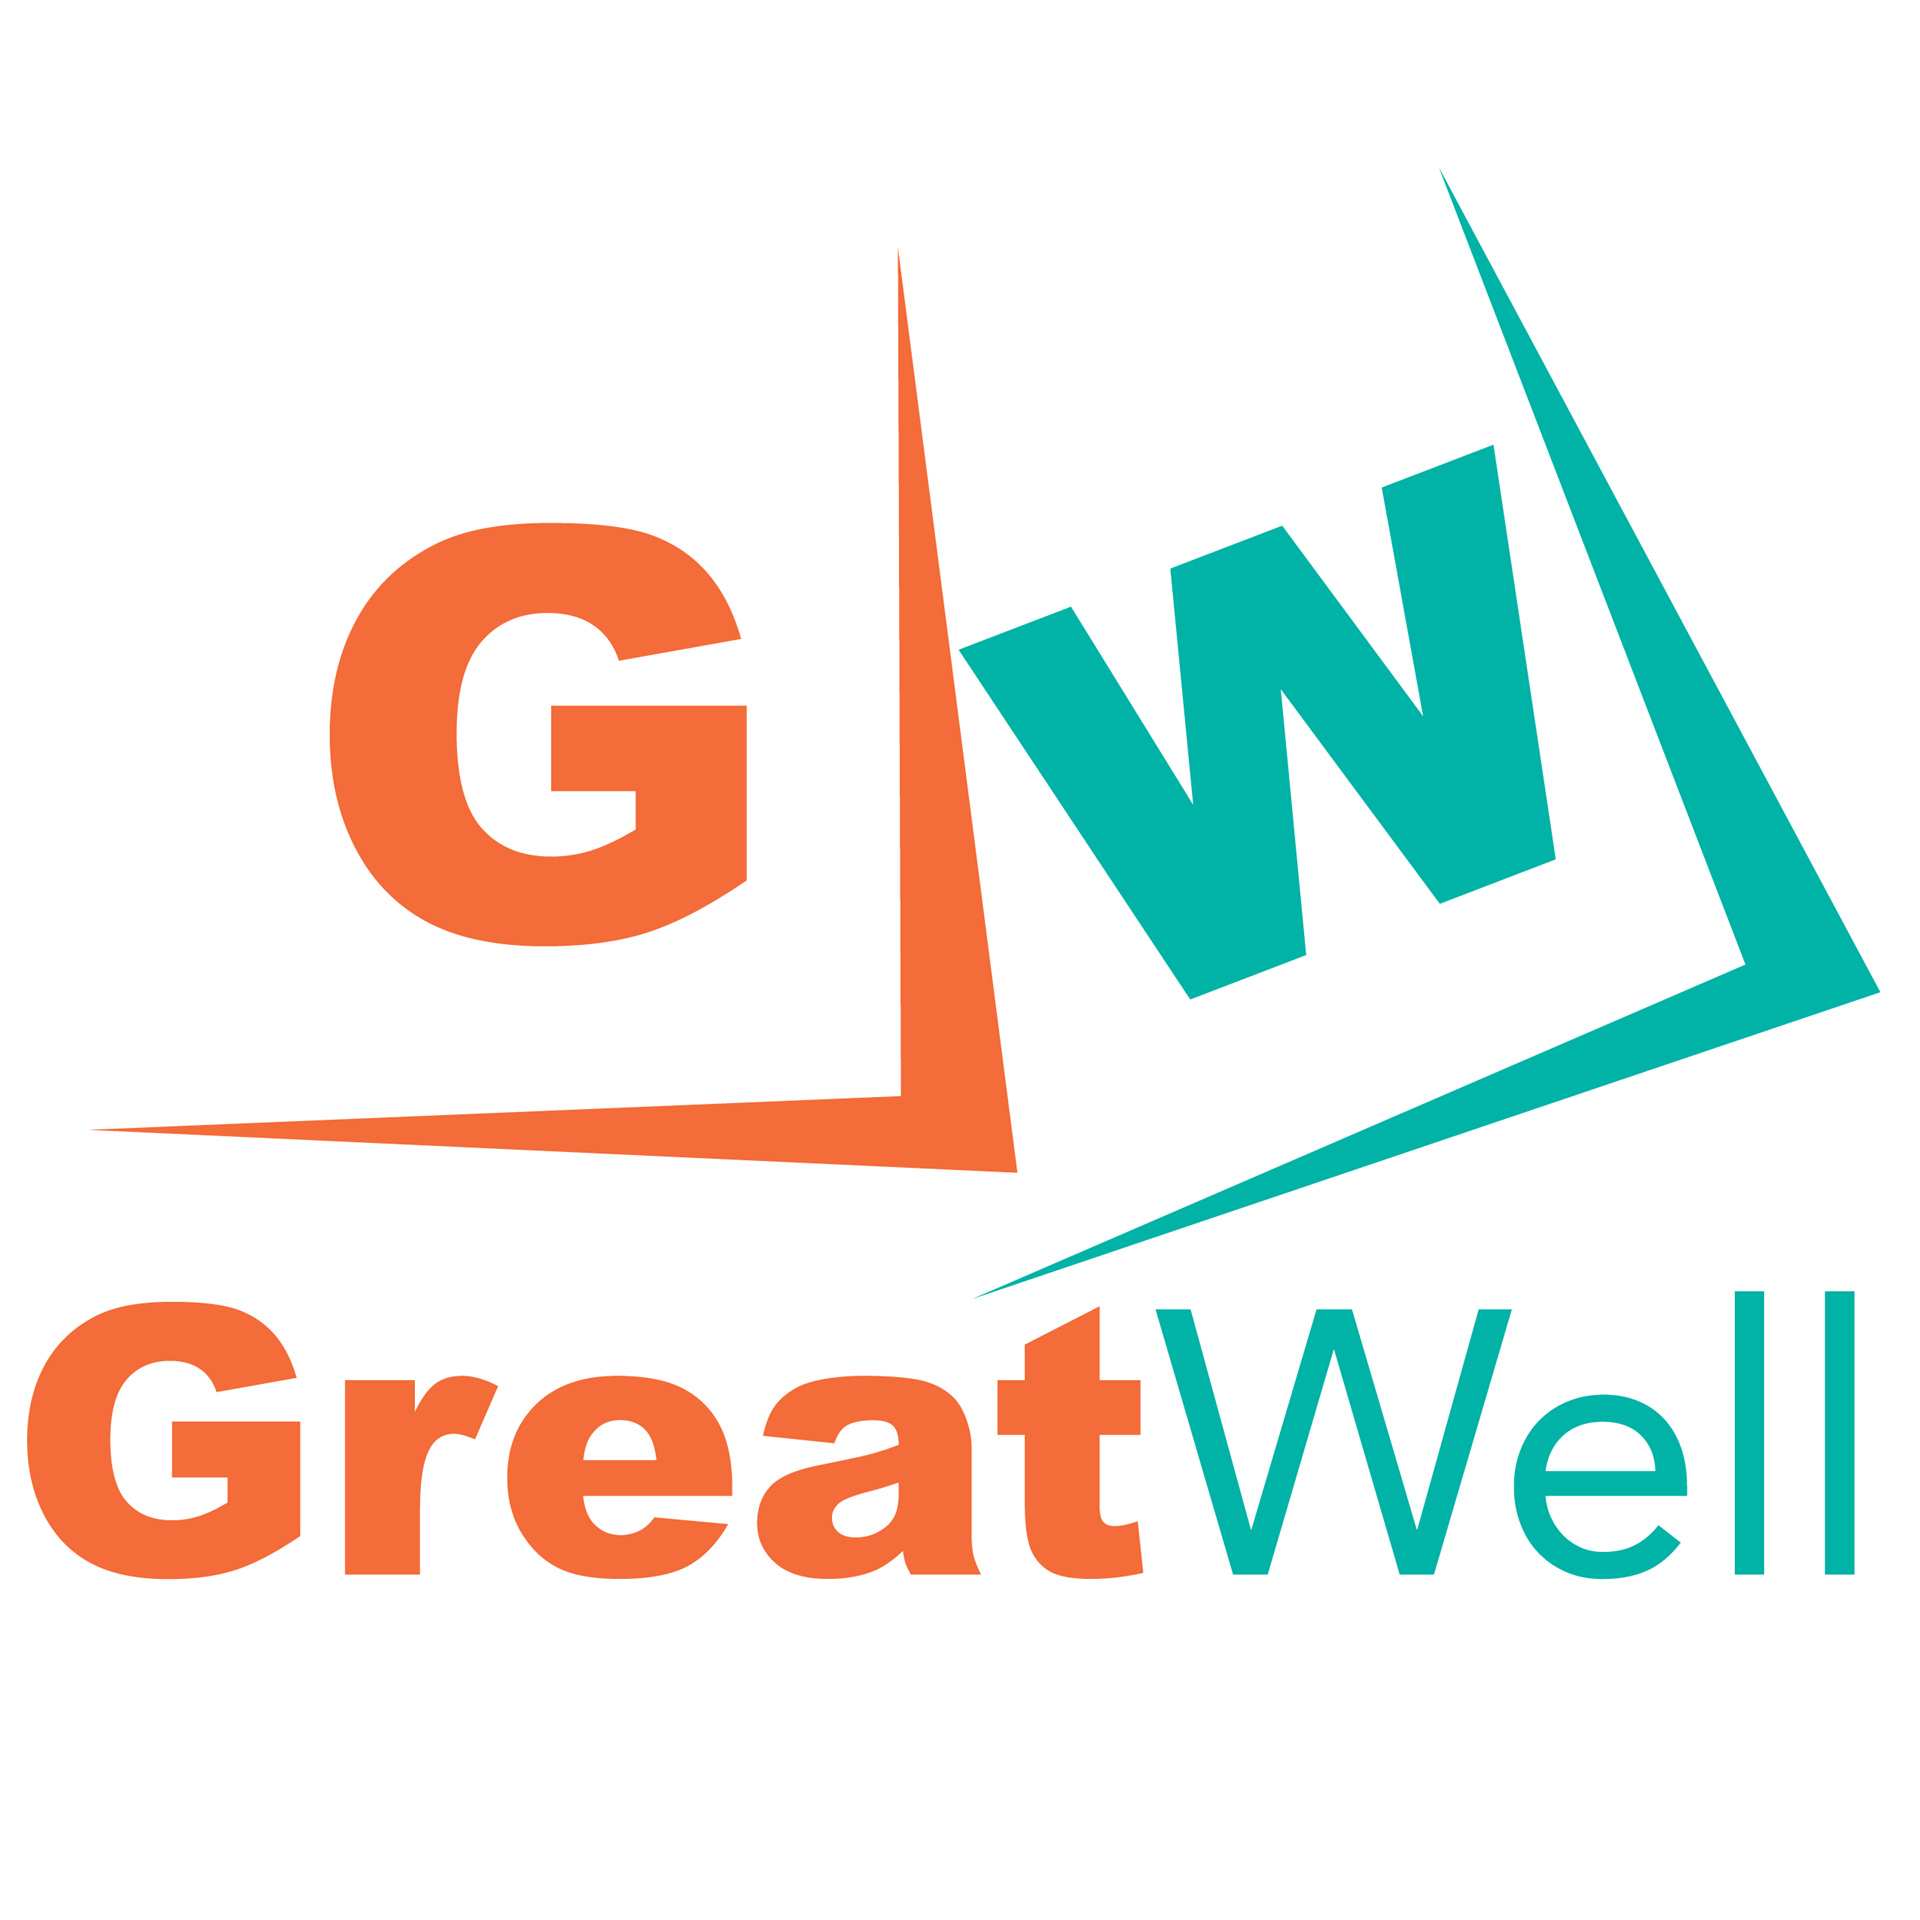 Great Well (HK) Limited